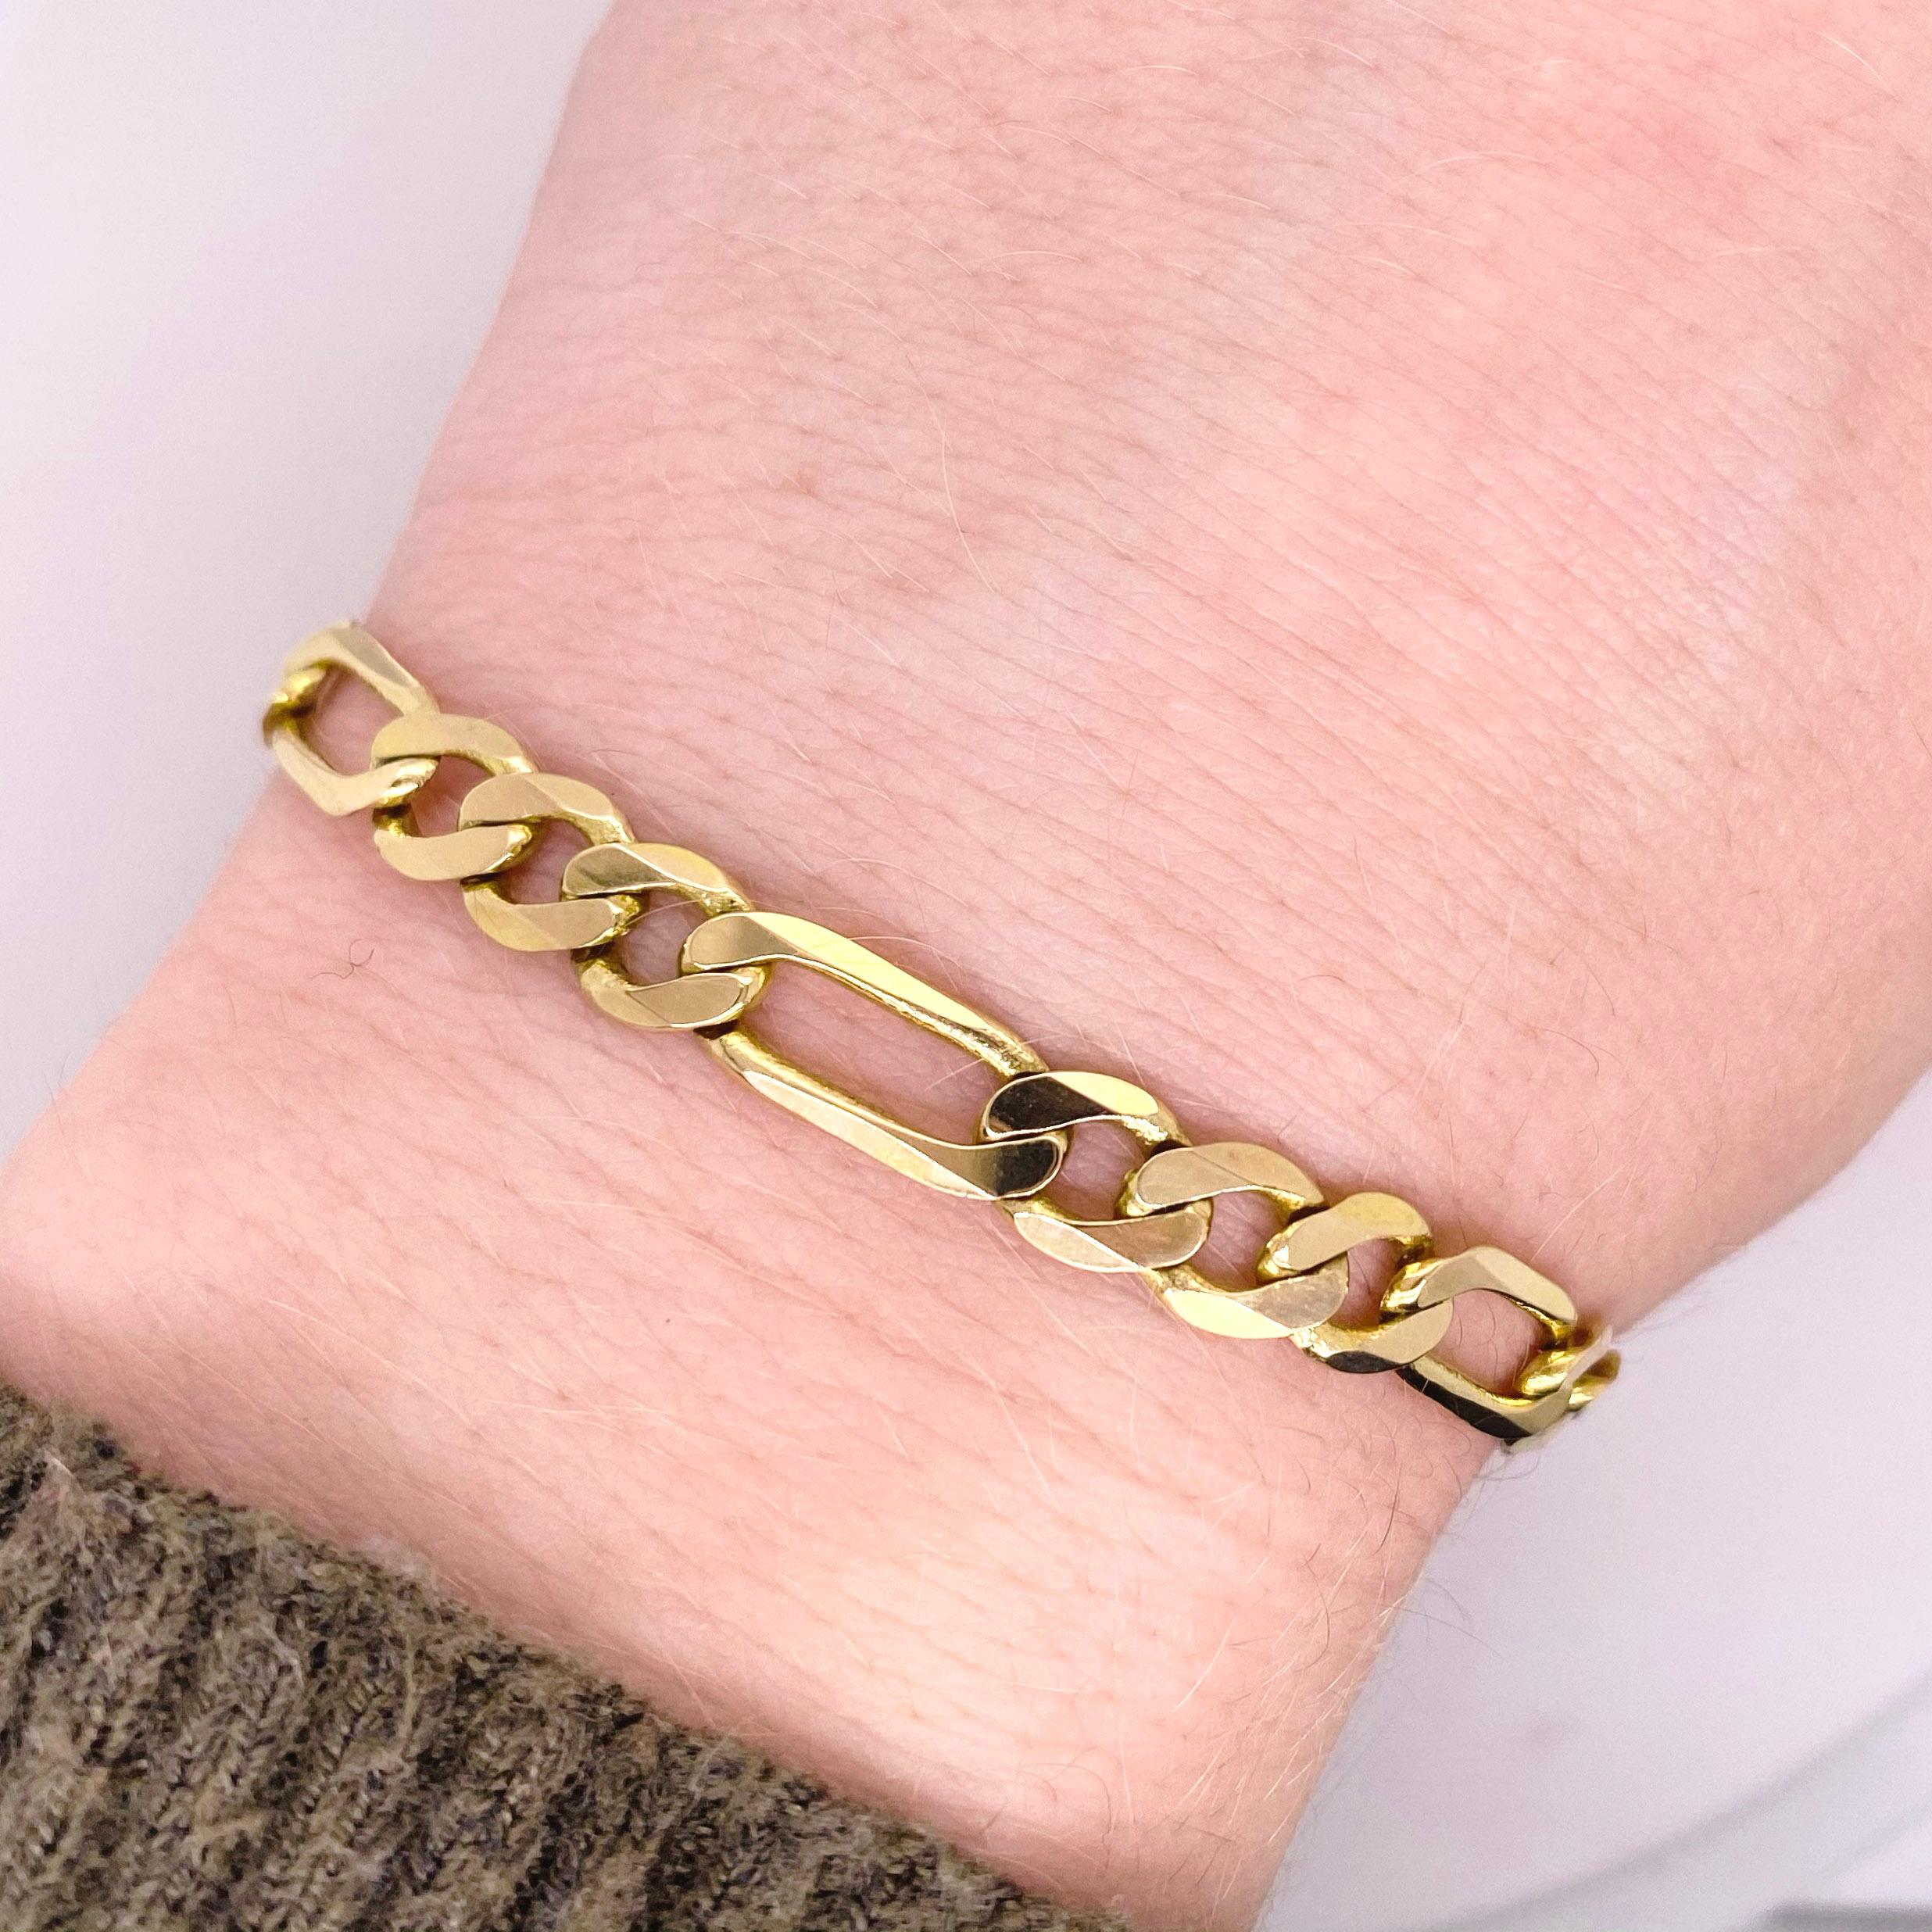 This stunning 14 karat gold figaro bracelet makes the perfect everyday accessory! The name of the design may have been inspired by the operas The Barber of Seville (by Gioachino Rossini) and The Marriage of Figaro (by Wolfgang Amadeus Mozart). This